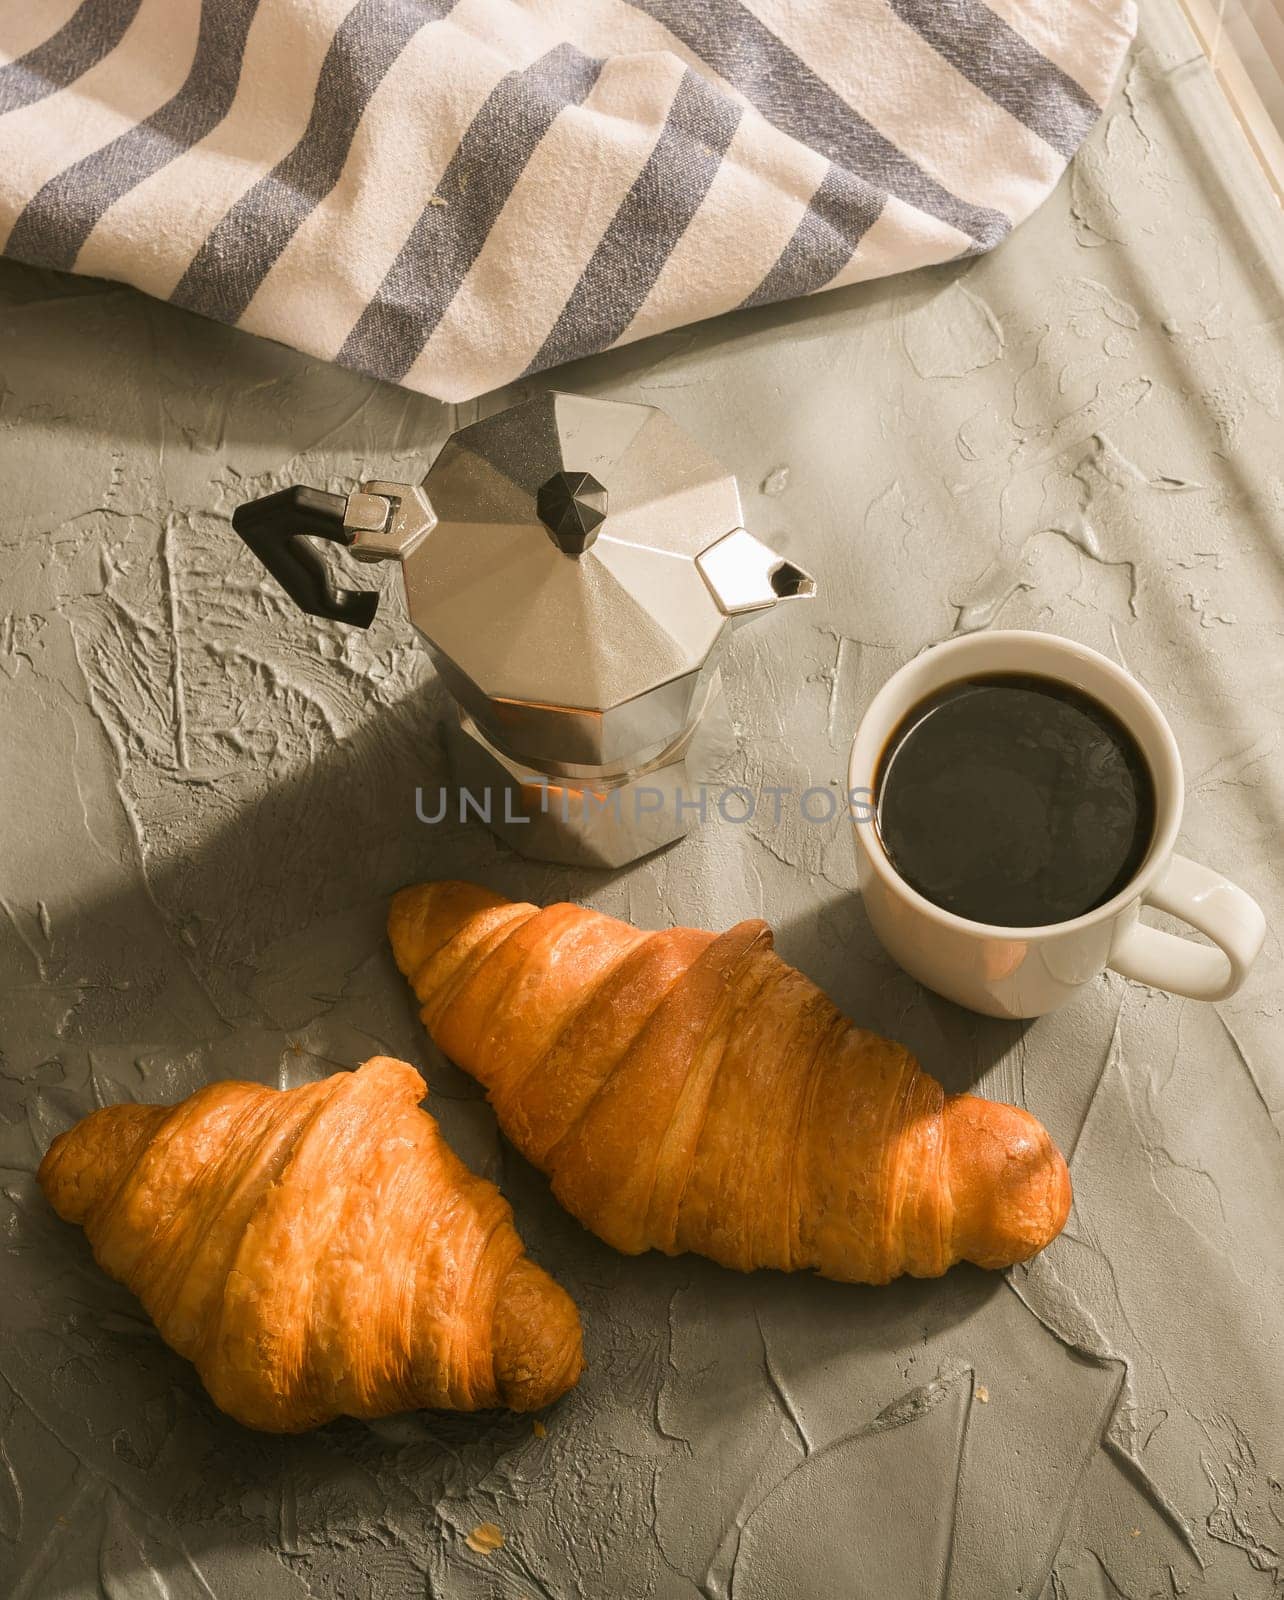 Breakfast with croissant and coffee and moka pot. Morning meal and breakfast concept. Top view. by Satura86